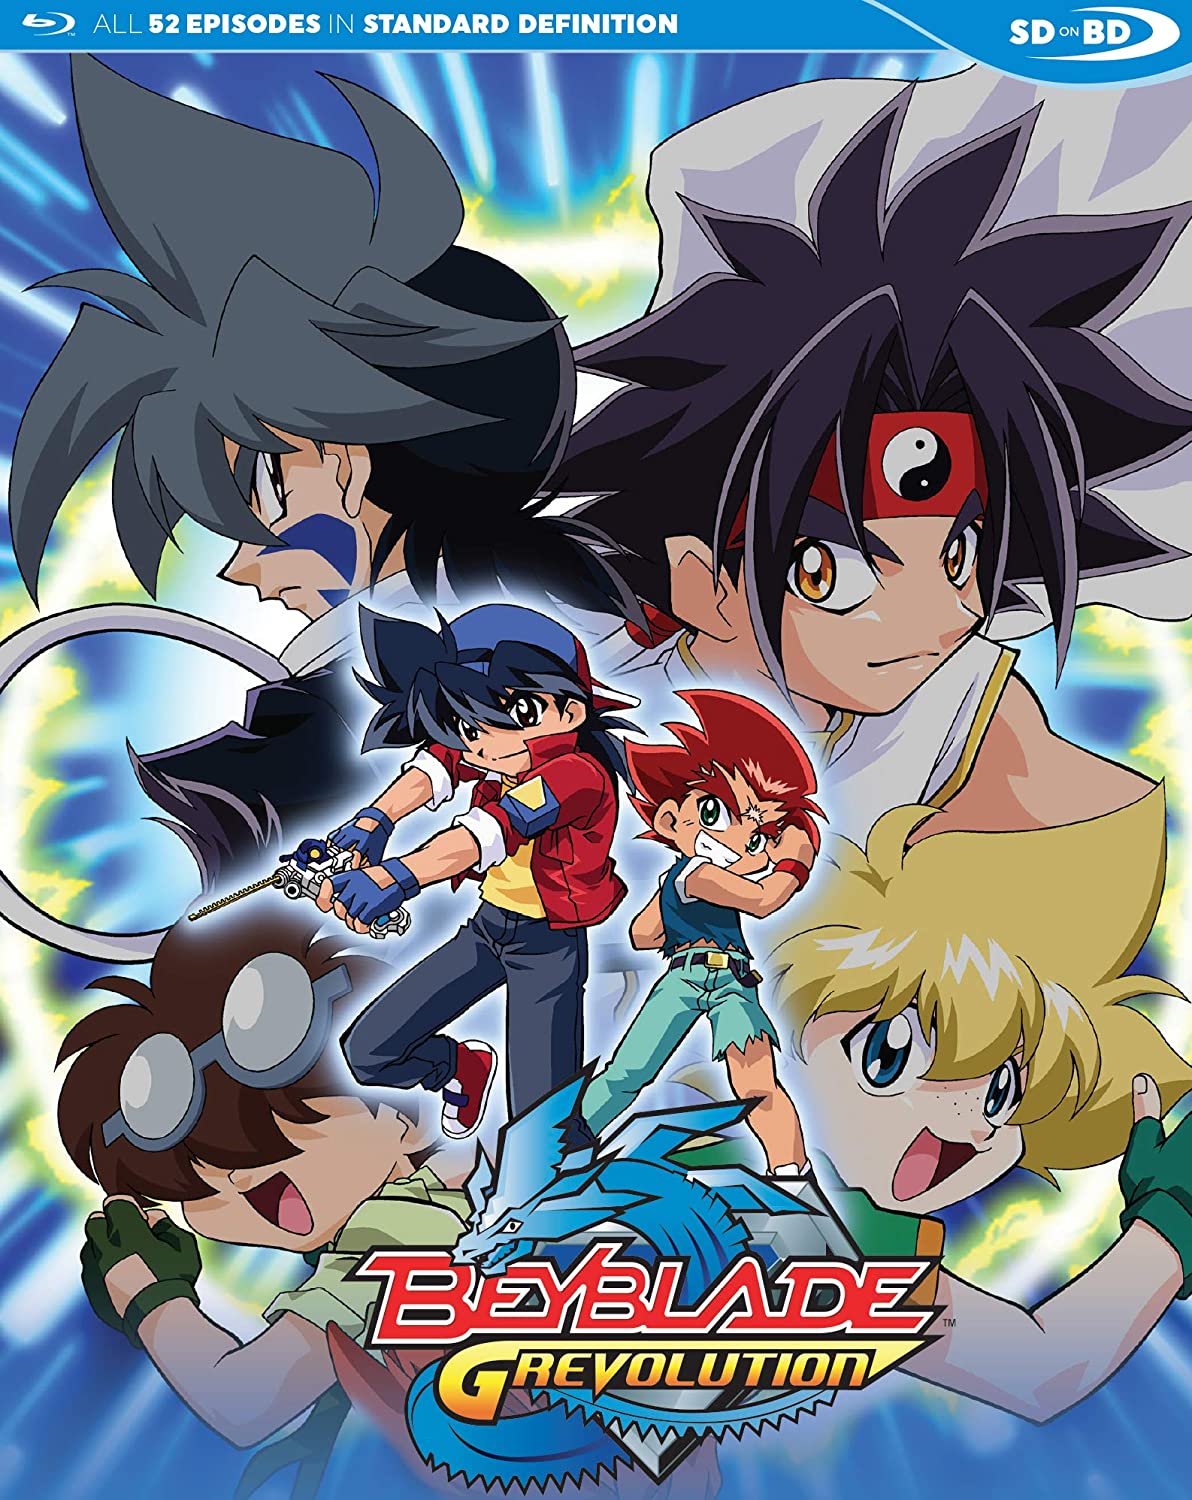 What is Beyblade? - Quora